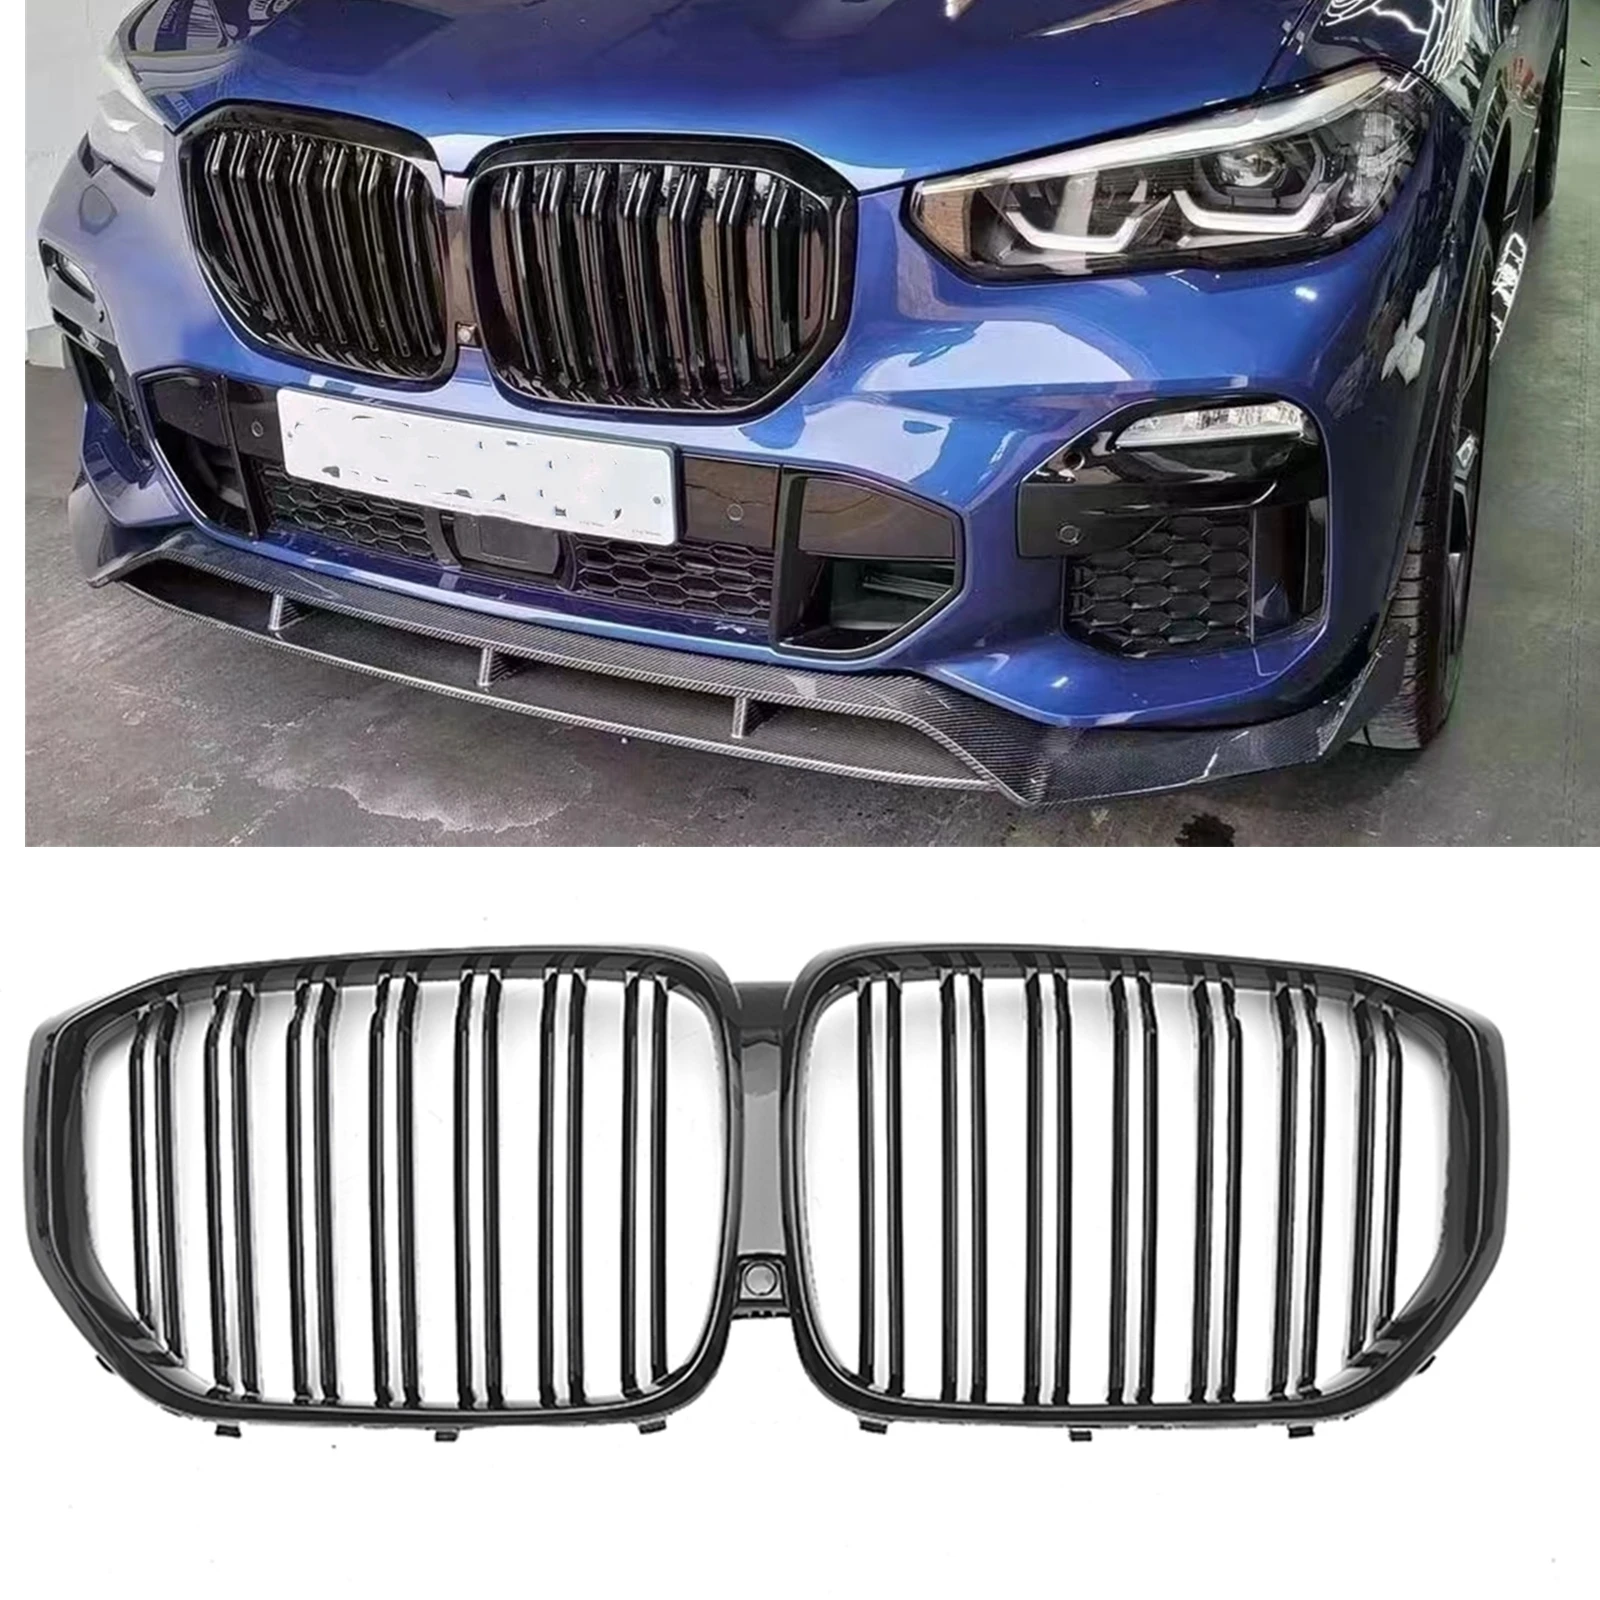 

For BMW G05 X5 30d 40i 50i M50d 2019-2022 Glossy Black Front Kidney Grille Racing Grill Performance Car Upper Bumper Hood Mesh